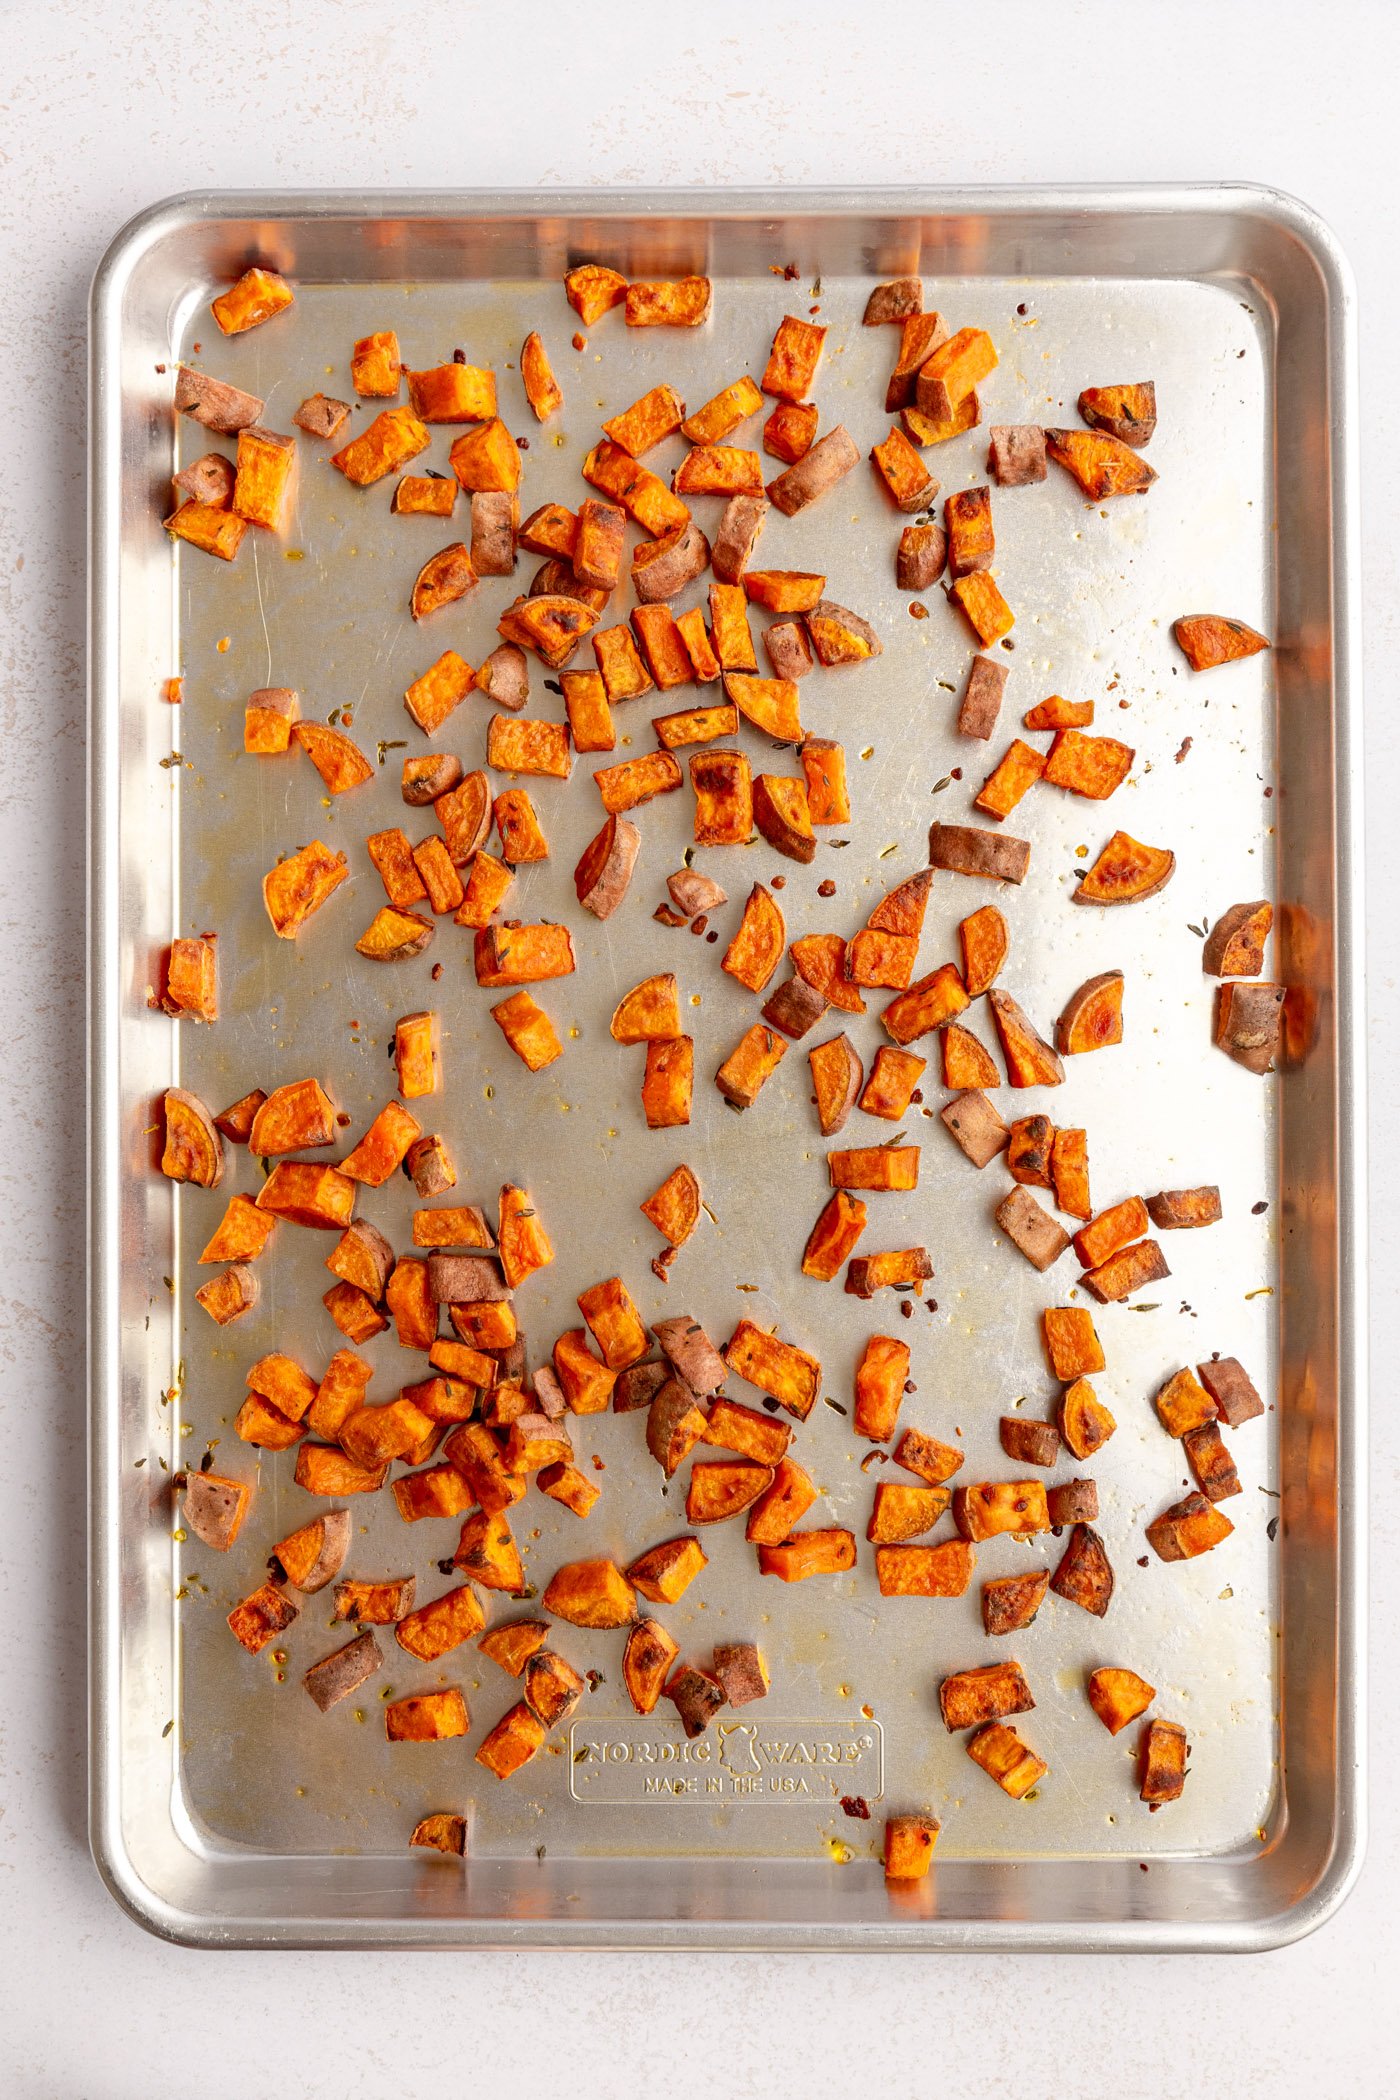 A metal sheet pan filled with evenly spread out roasted diced sweet potatoes. The sheet pan is sitting on a white surface.